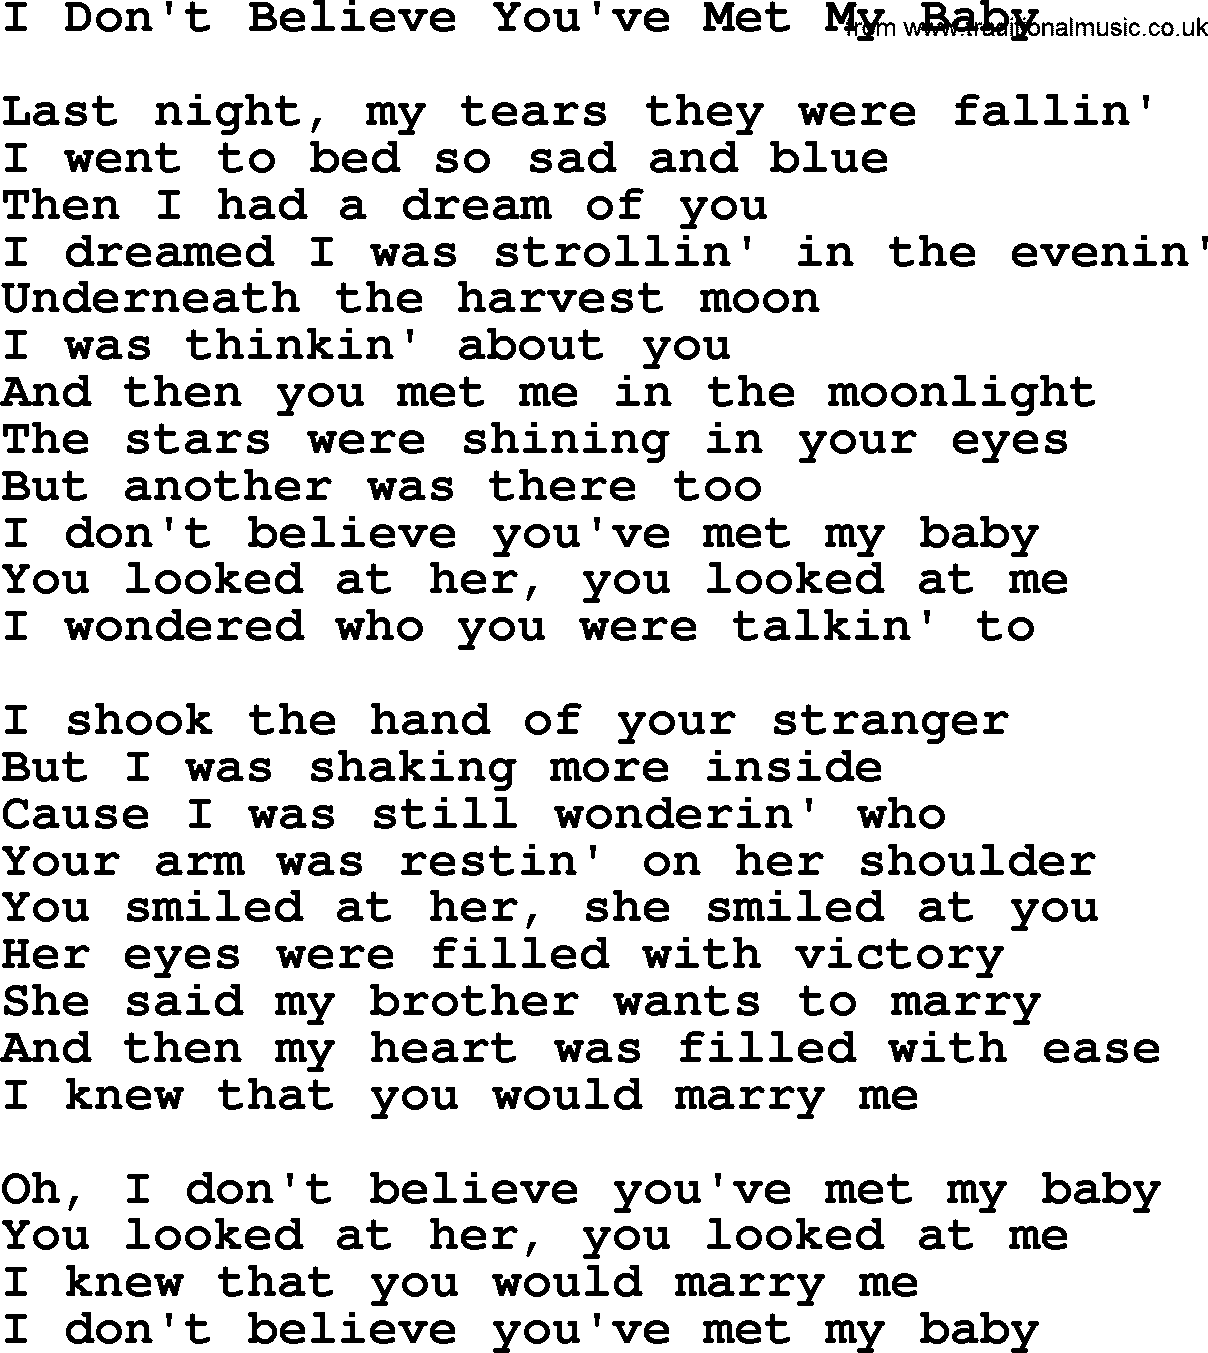 Dolly Parton song I Don't Believe You've Met My Baby.txt lyrics